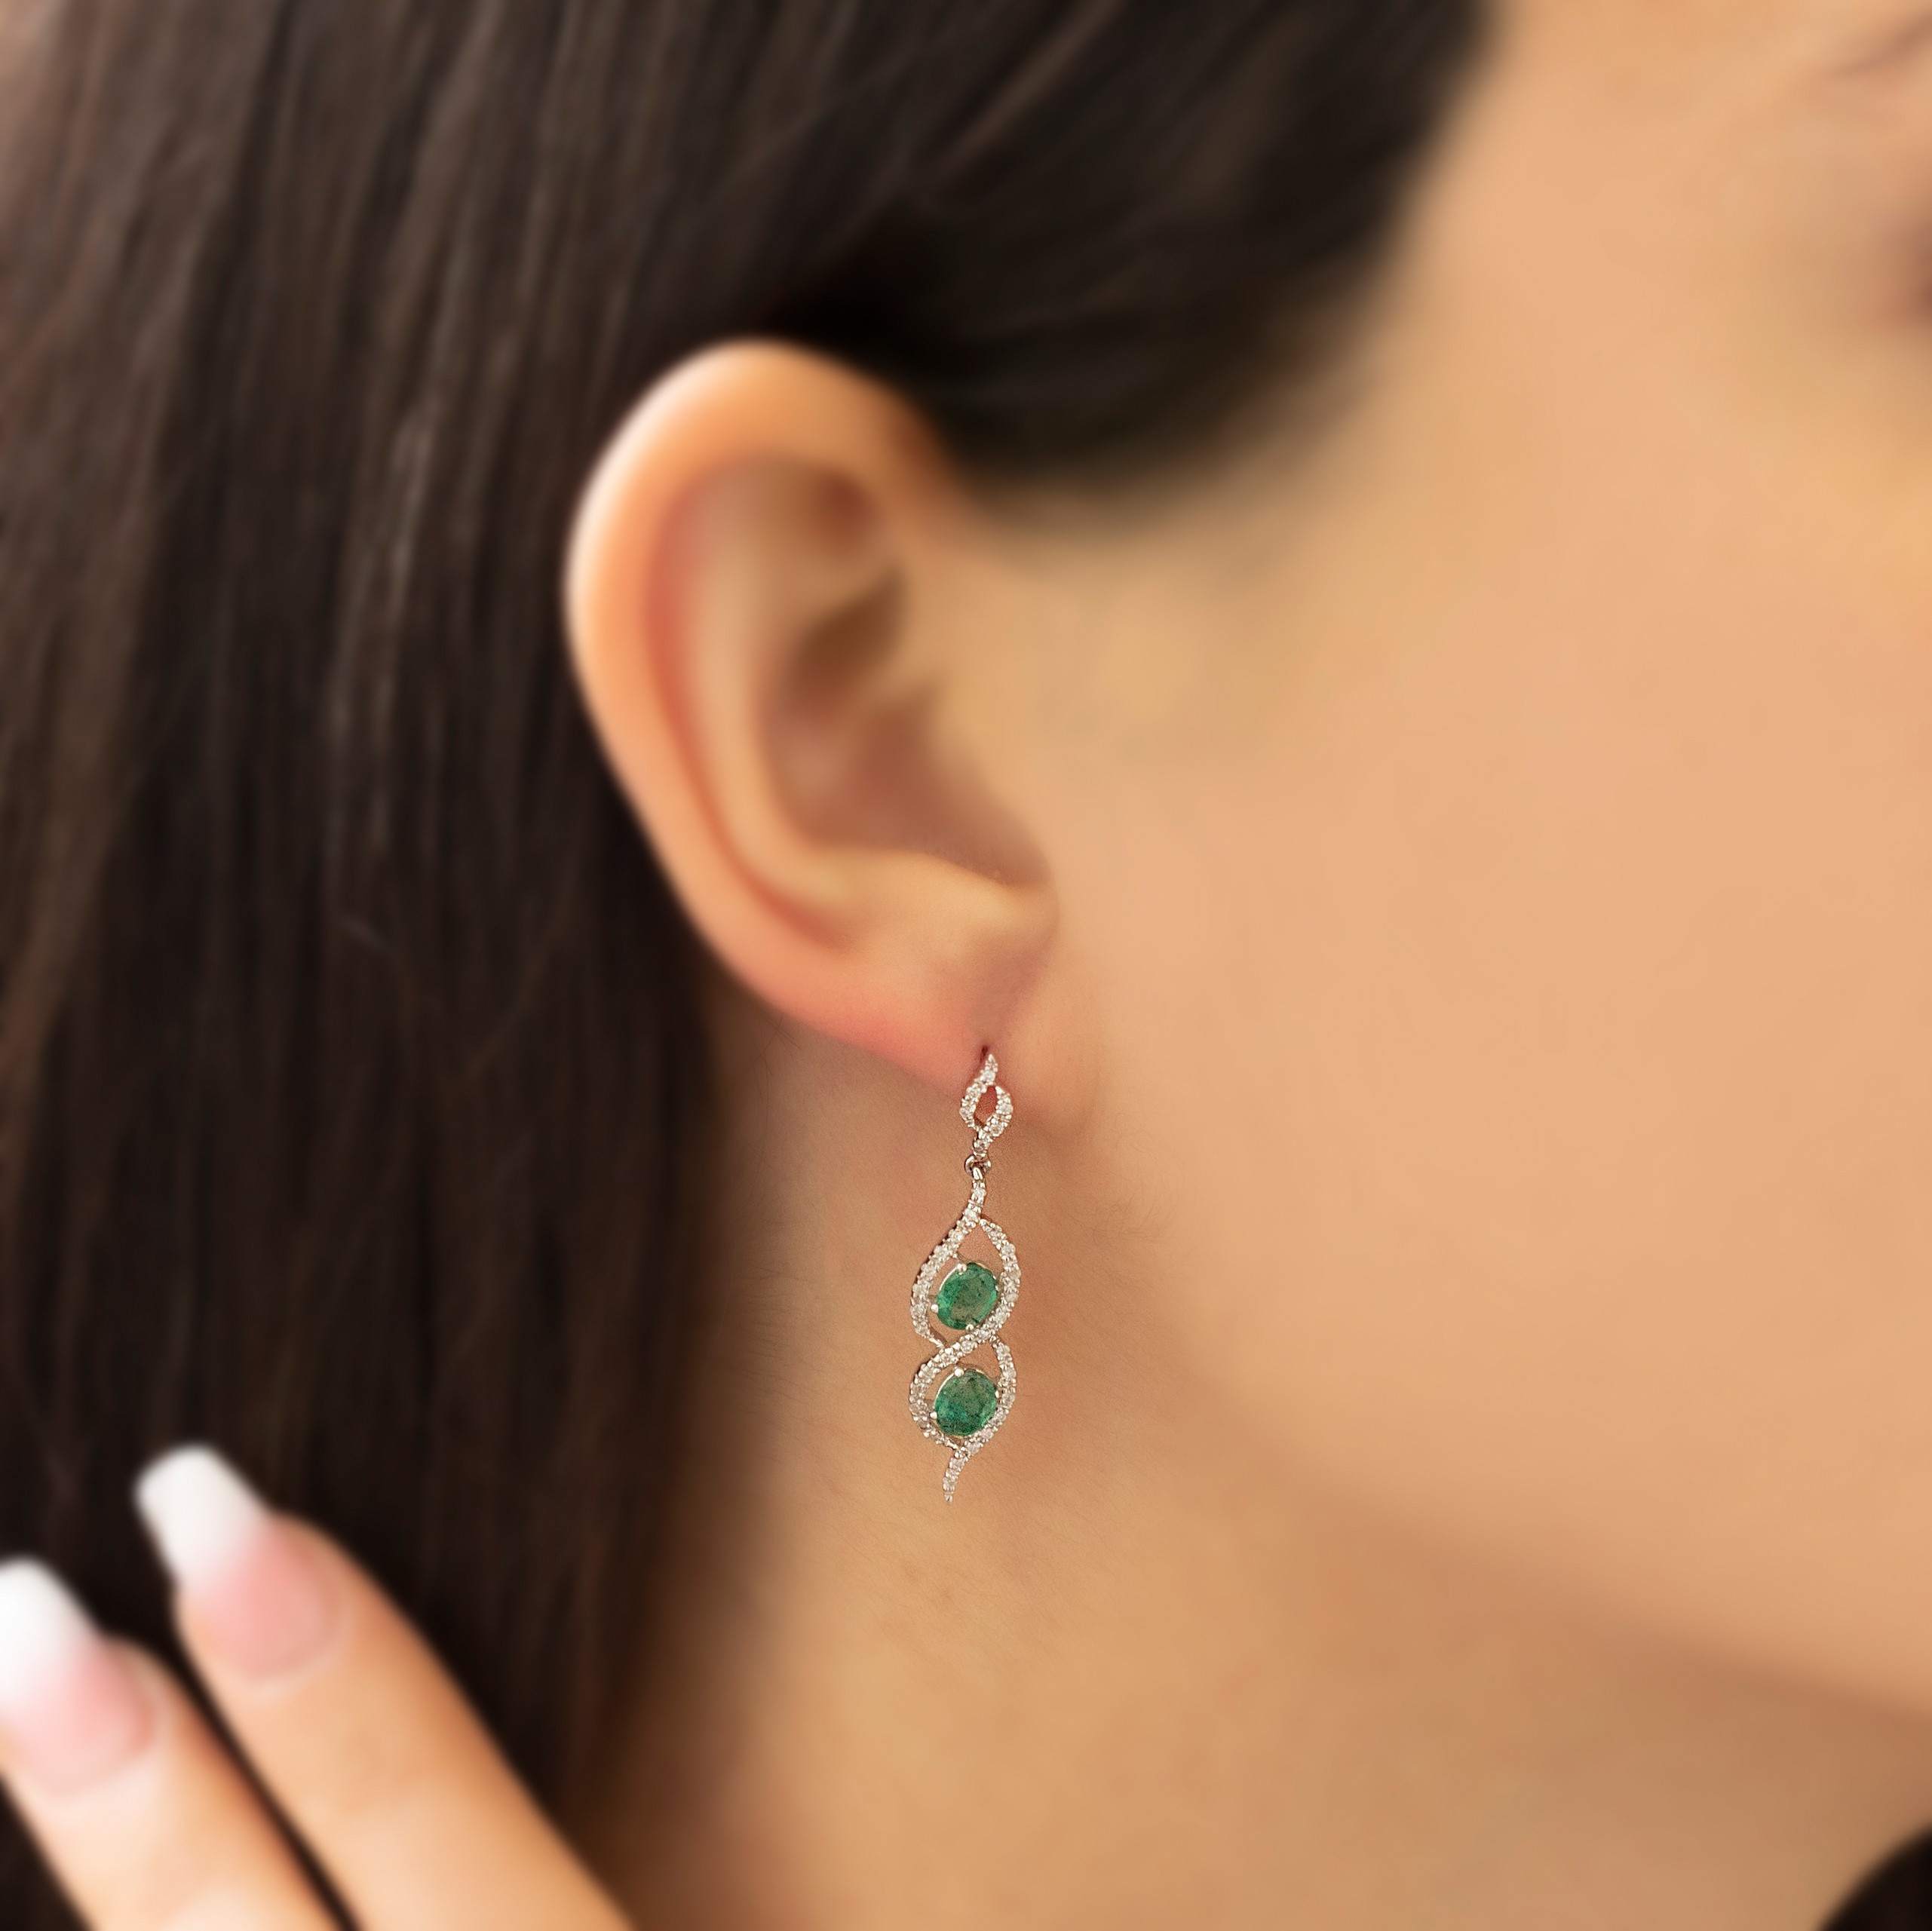 Curved Design Diamond Earrings with Gold Emerald Stones